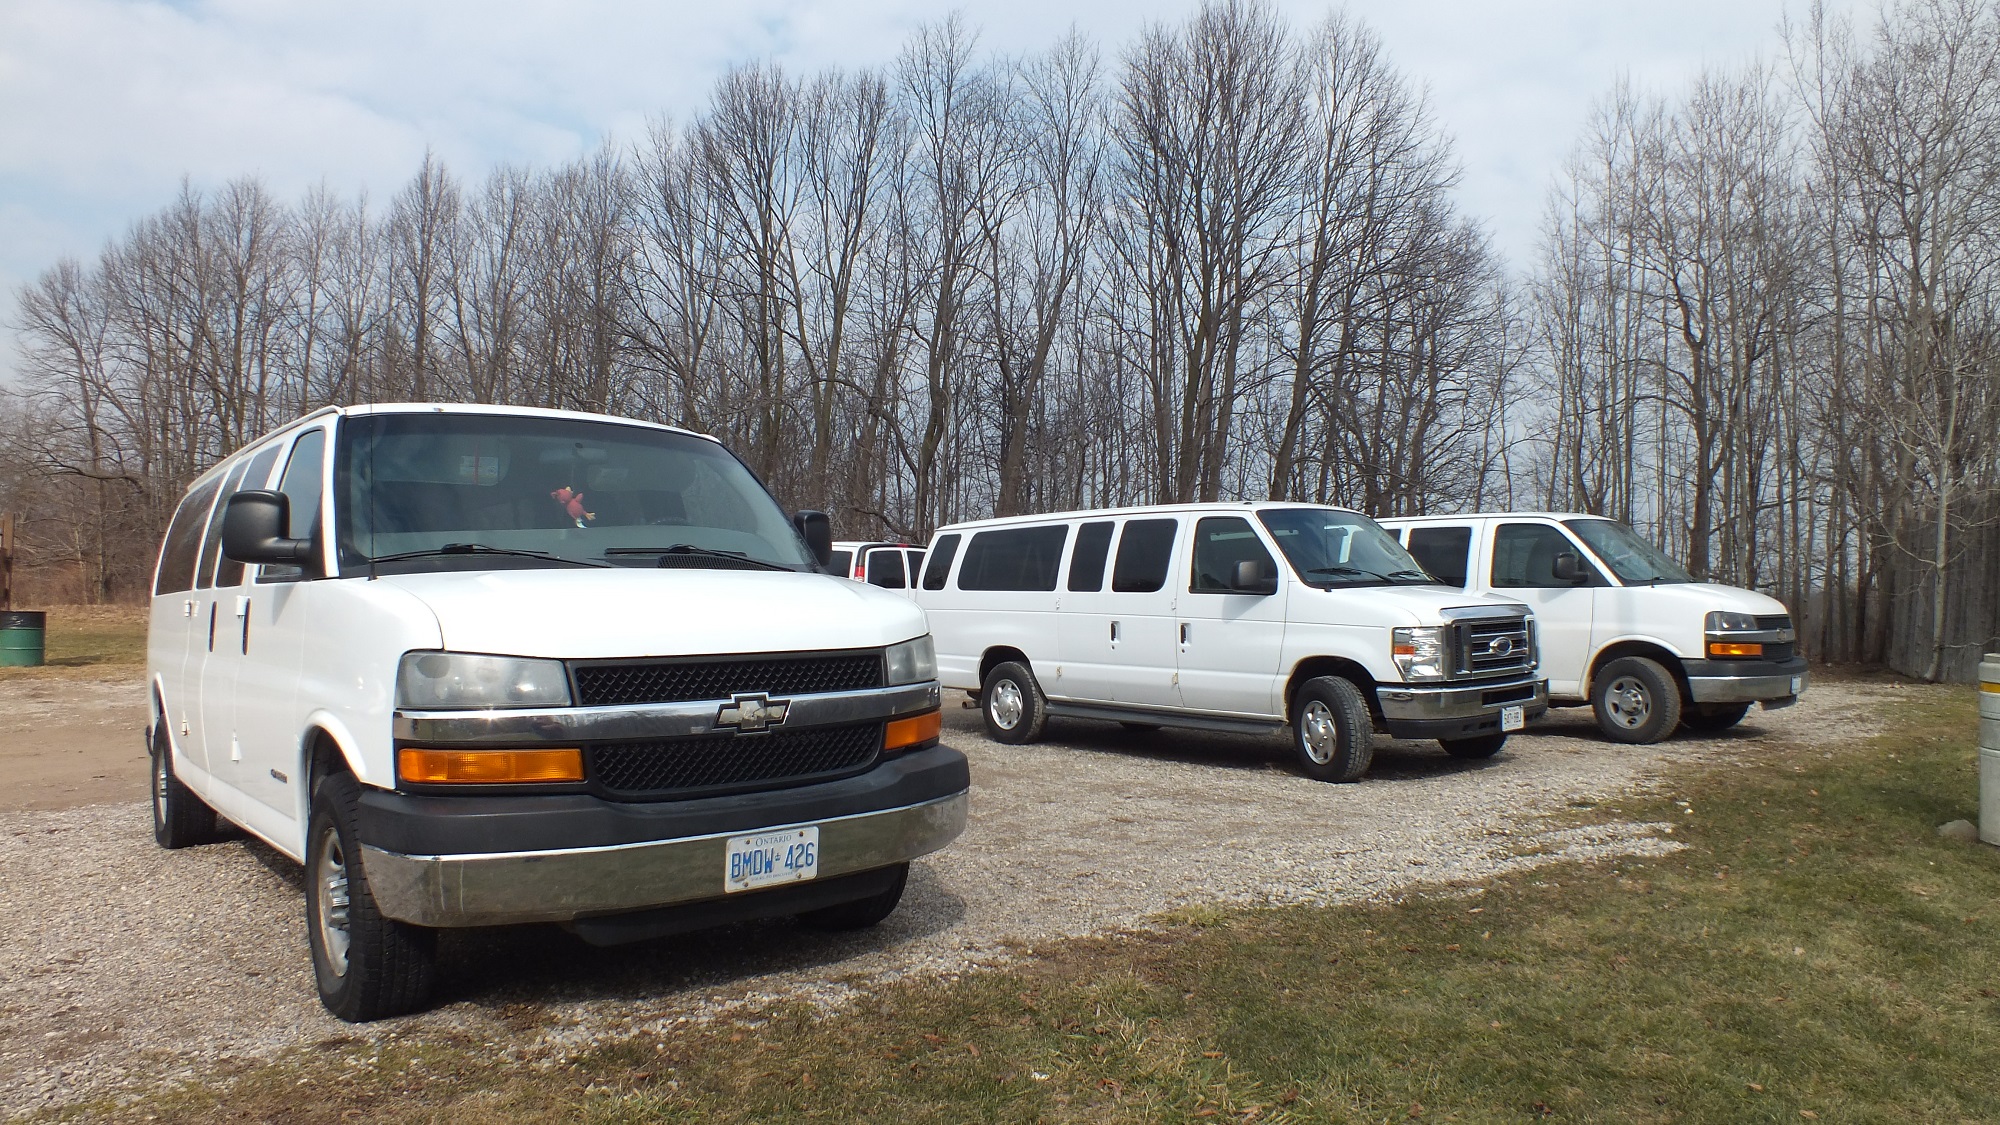 TMHC white field vans parked in the Museum of Ontario Archaeology in Fall